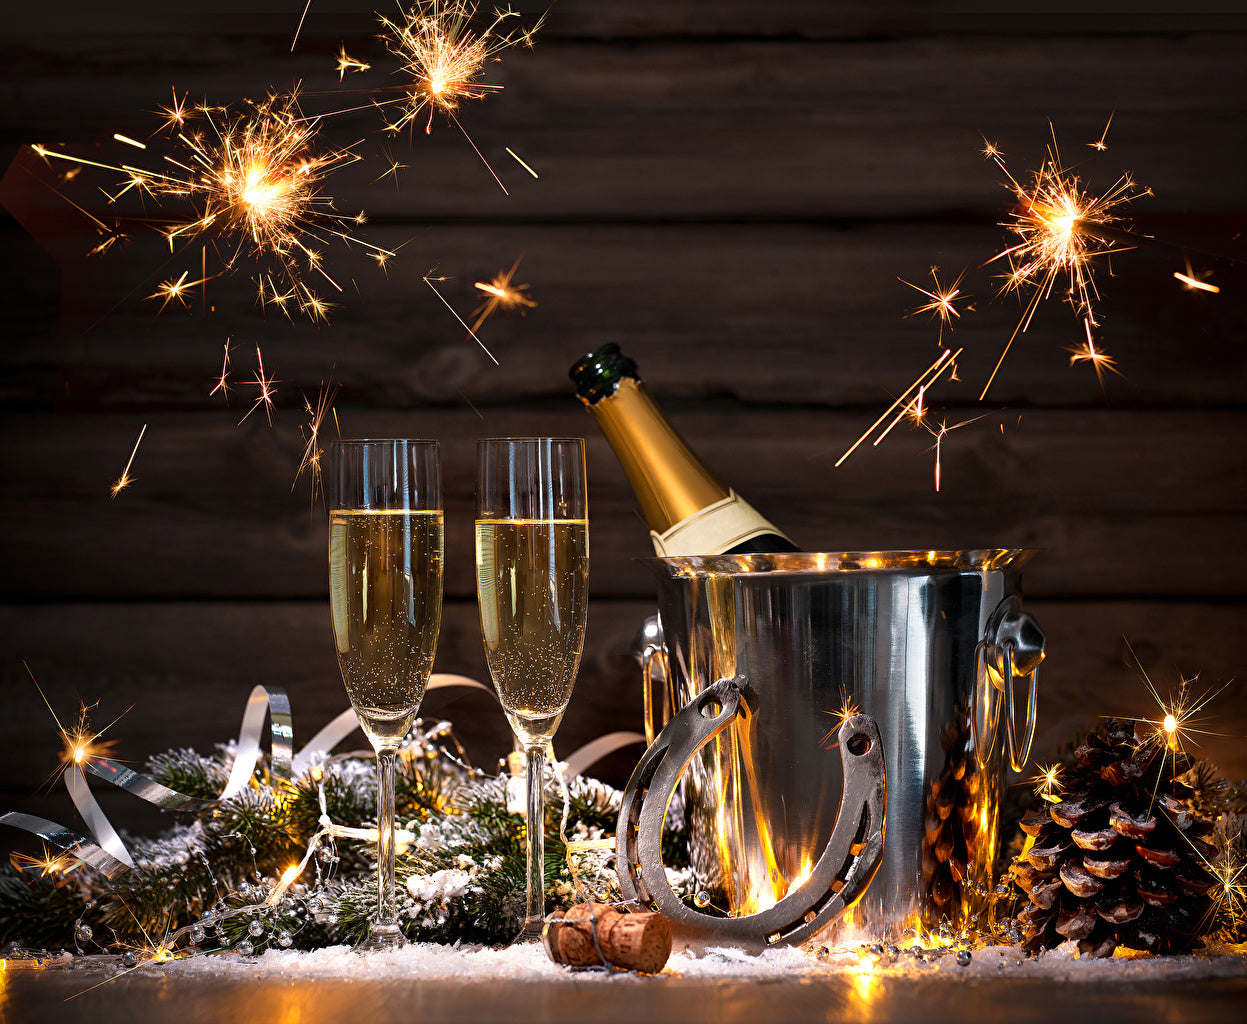 Happy New Year - New Year's Resolutions - Sparklers on New Years Eve - Pretty Collected